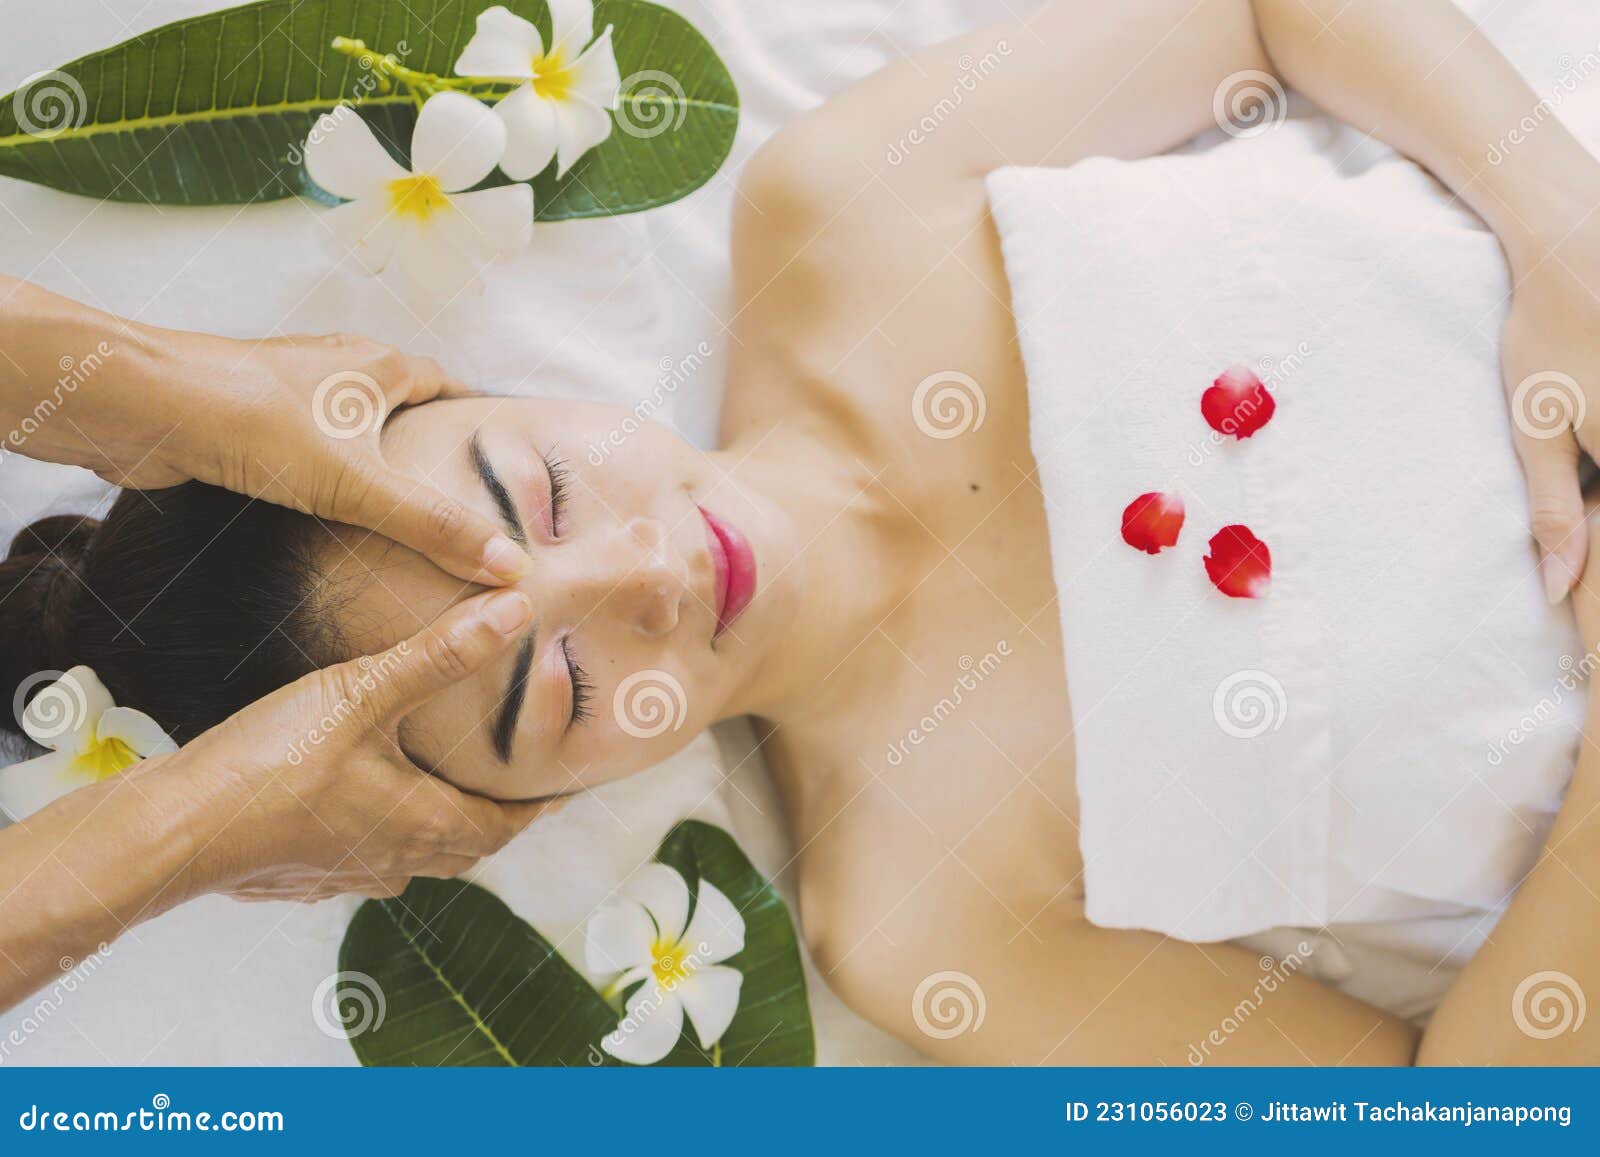 Masseur Doing Massage The Head Of An Asian Woman Stock Image Image Of Medical Female 231056023